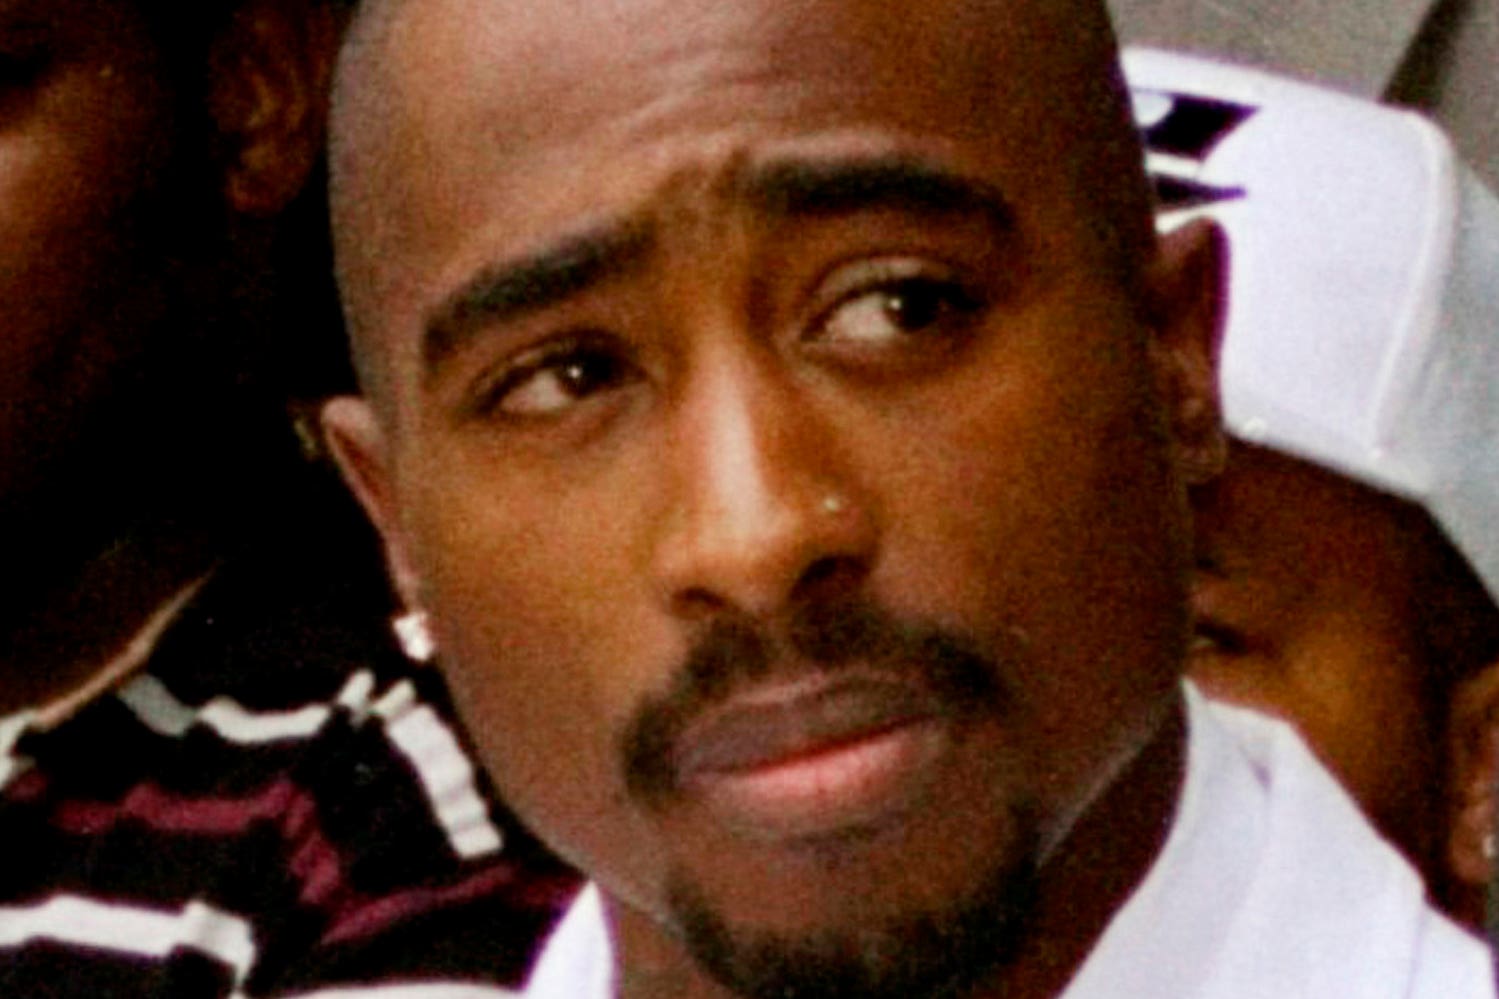 Las Vegas police raided a home in connection with the unsolved murder of Tupac Shakur in 1996